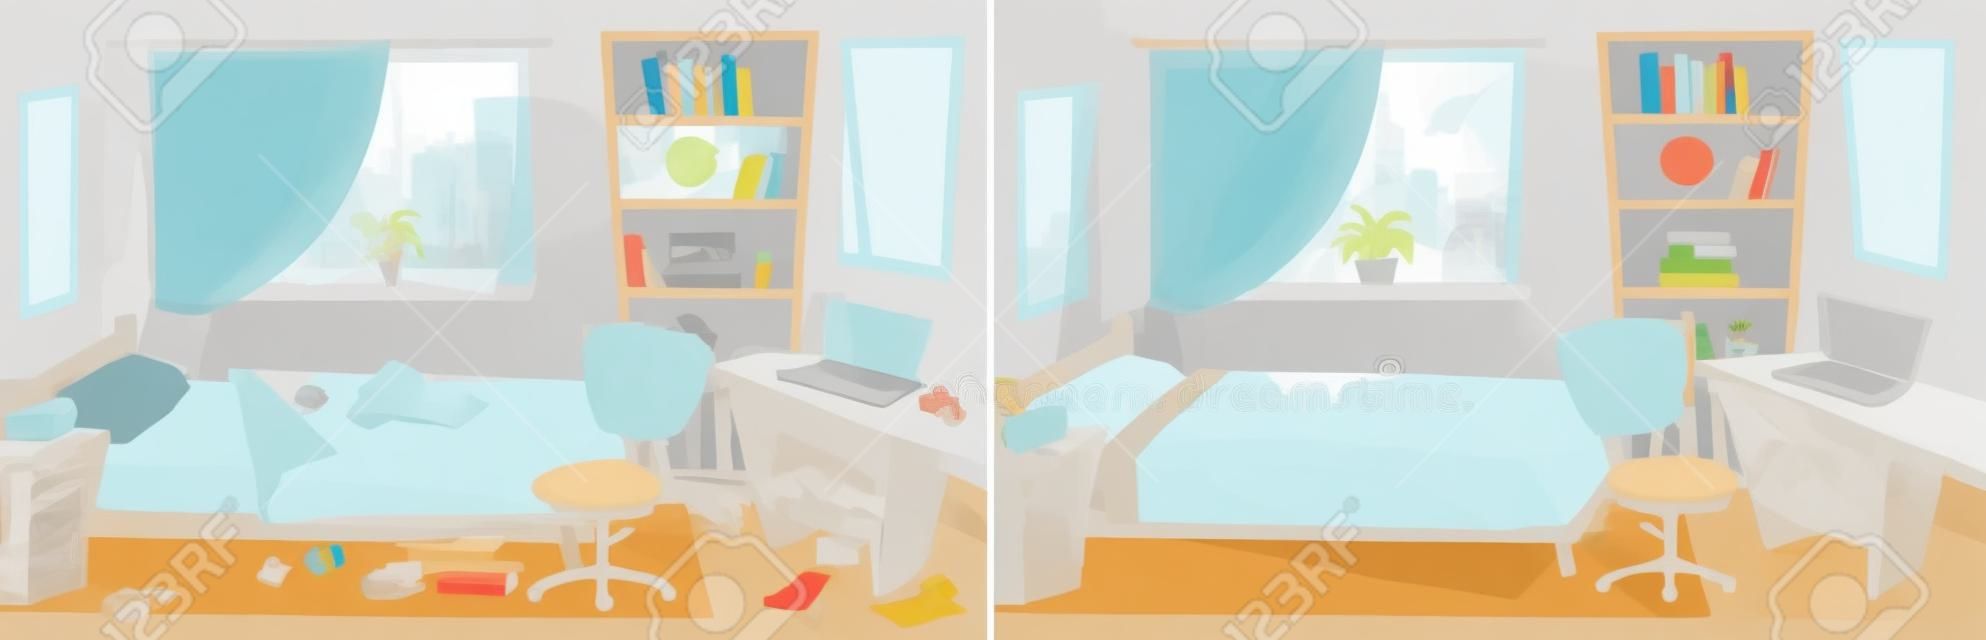 Room before and after cleaning. Comparison of messy bedroom and clean kid bedroom. Home interior after tiding service. Dirty window, bed, paper around room. Table and bookshelf vector illustration